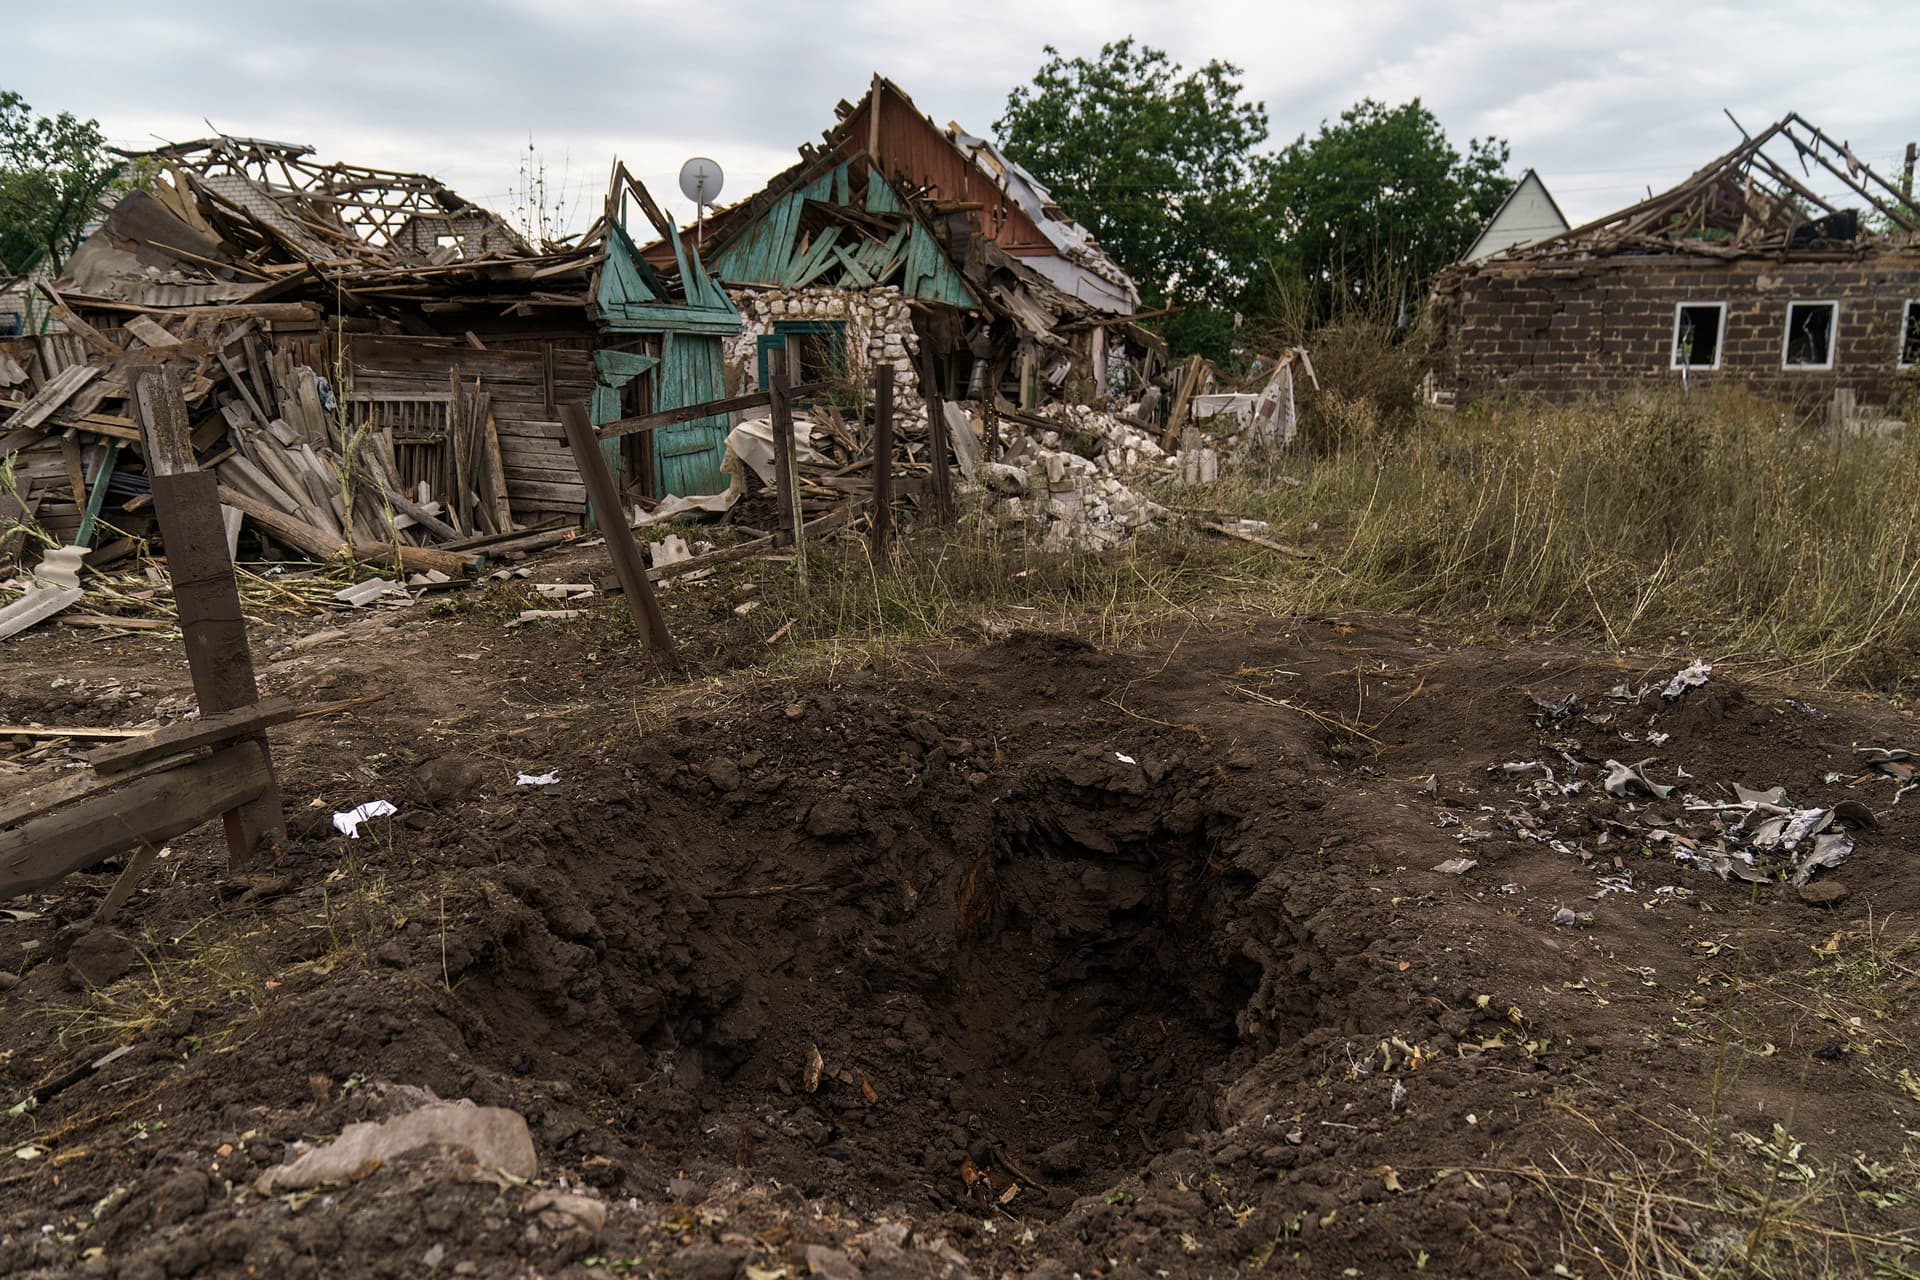 A crater from a Russian rocket attack is seen next to damaged homes in Kramatorsk